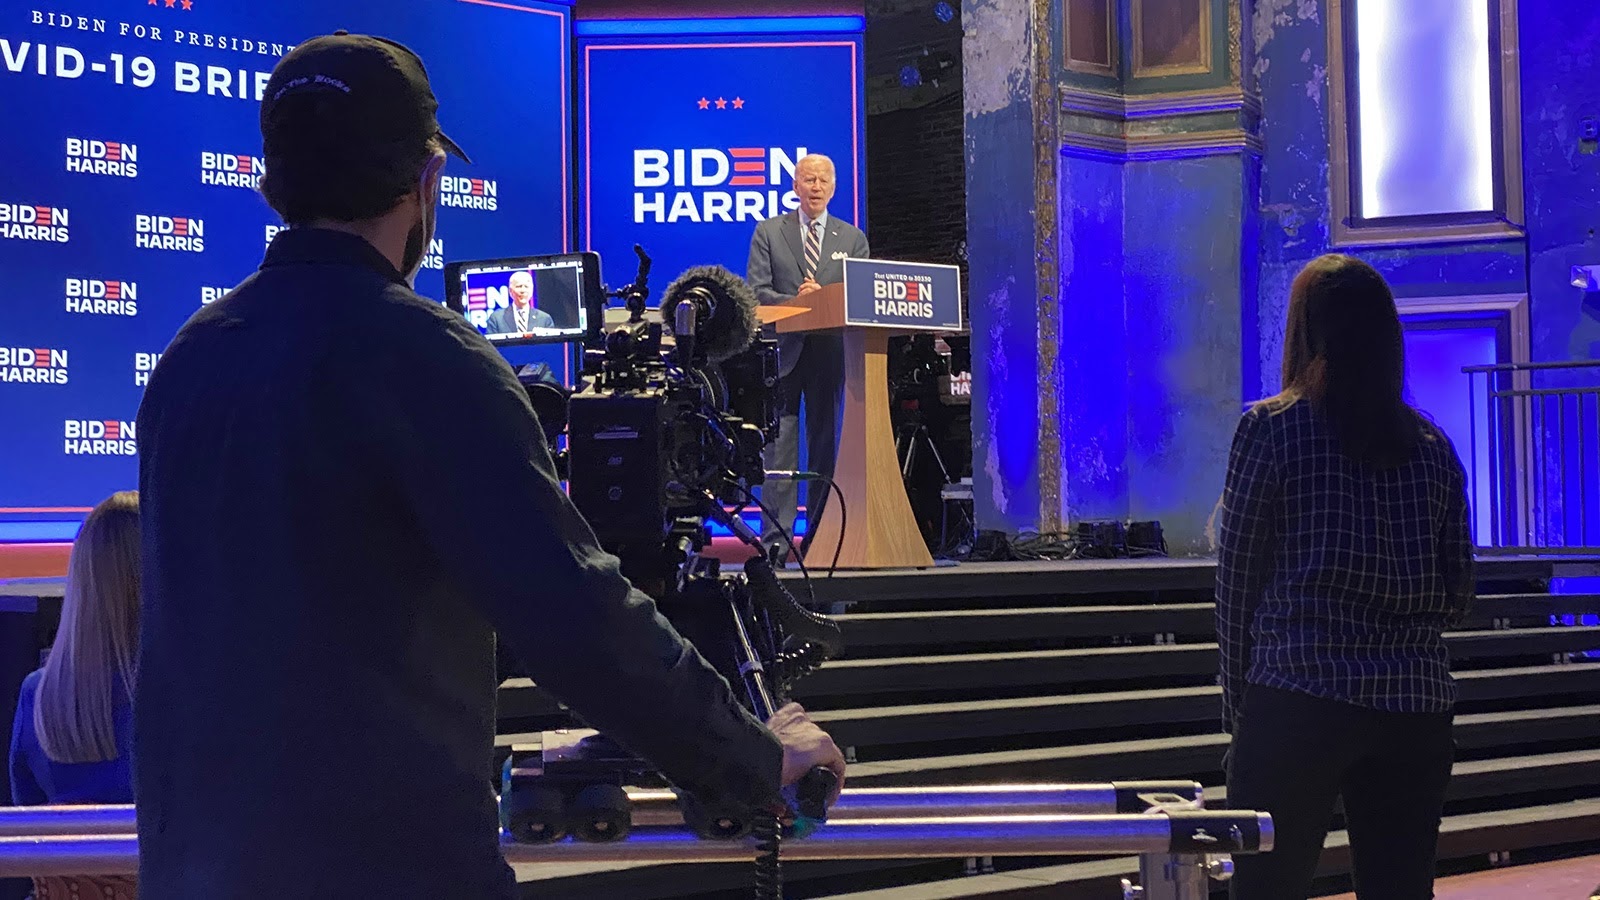 The Biden campaign used C2C to keep moving